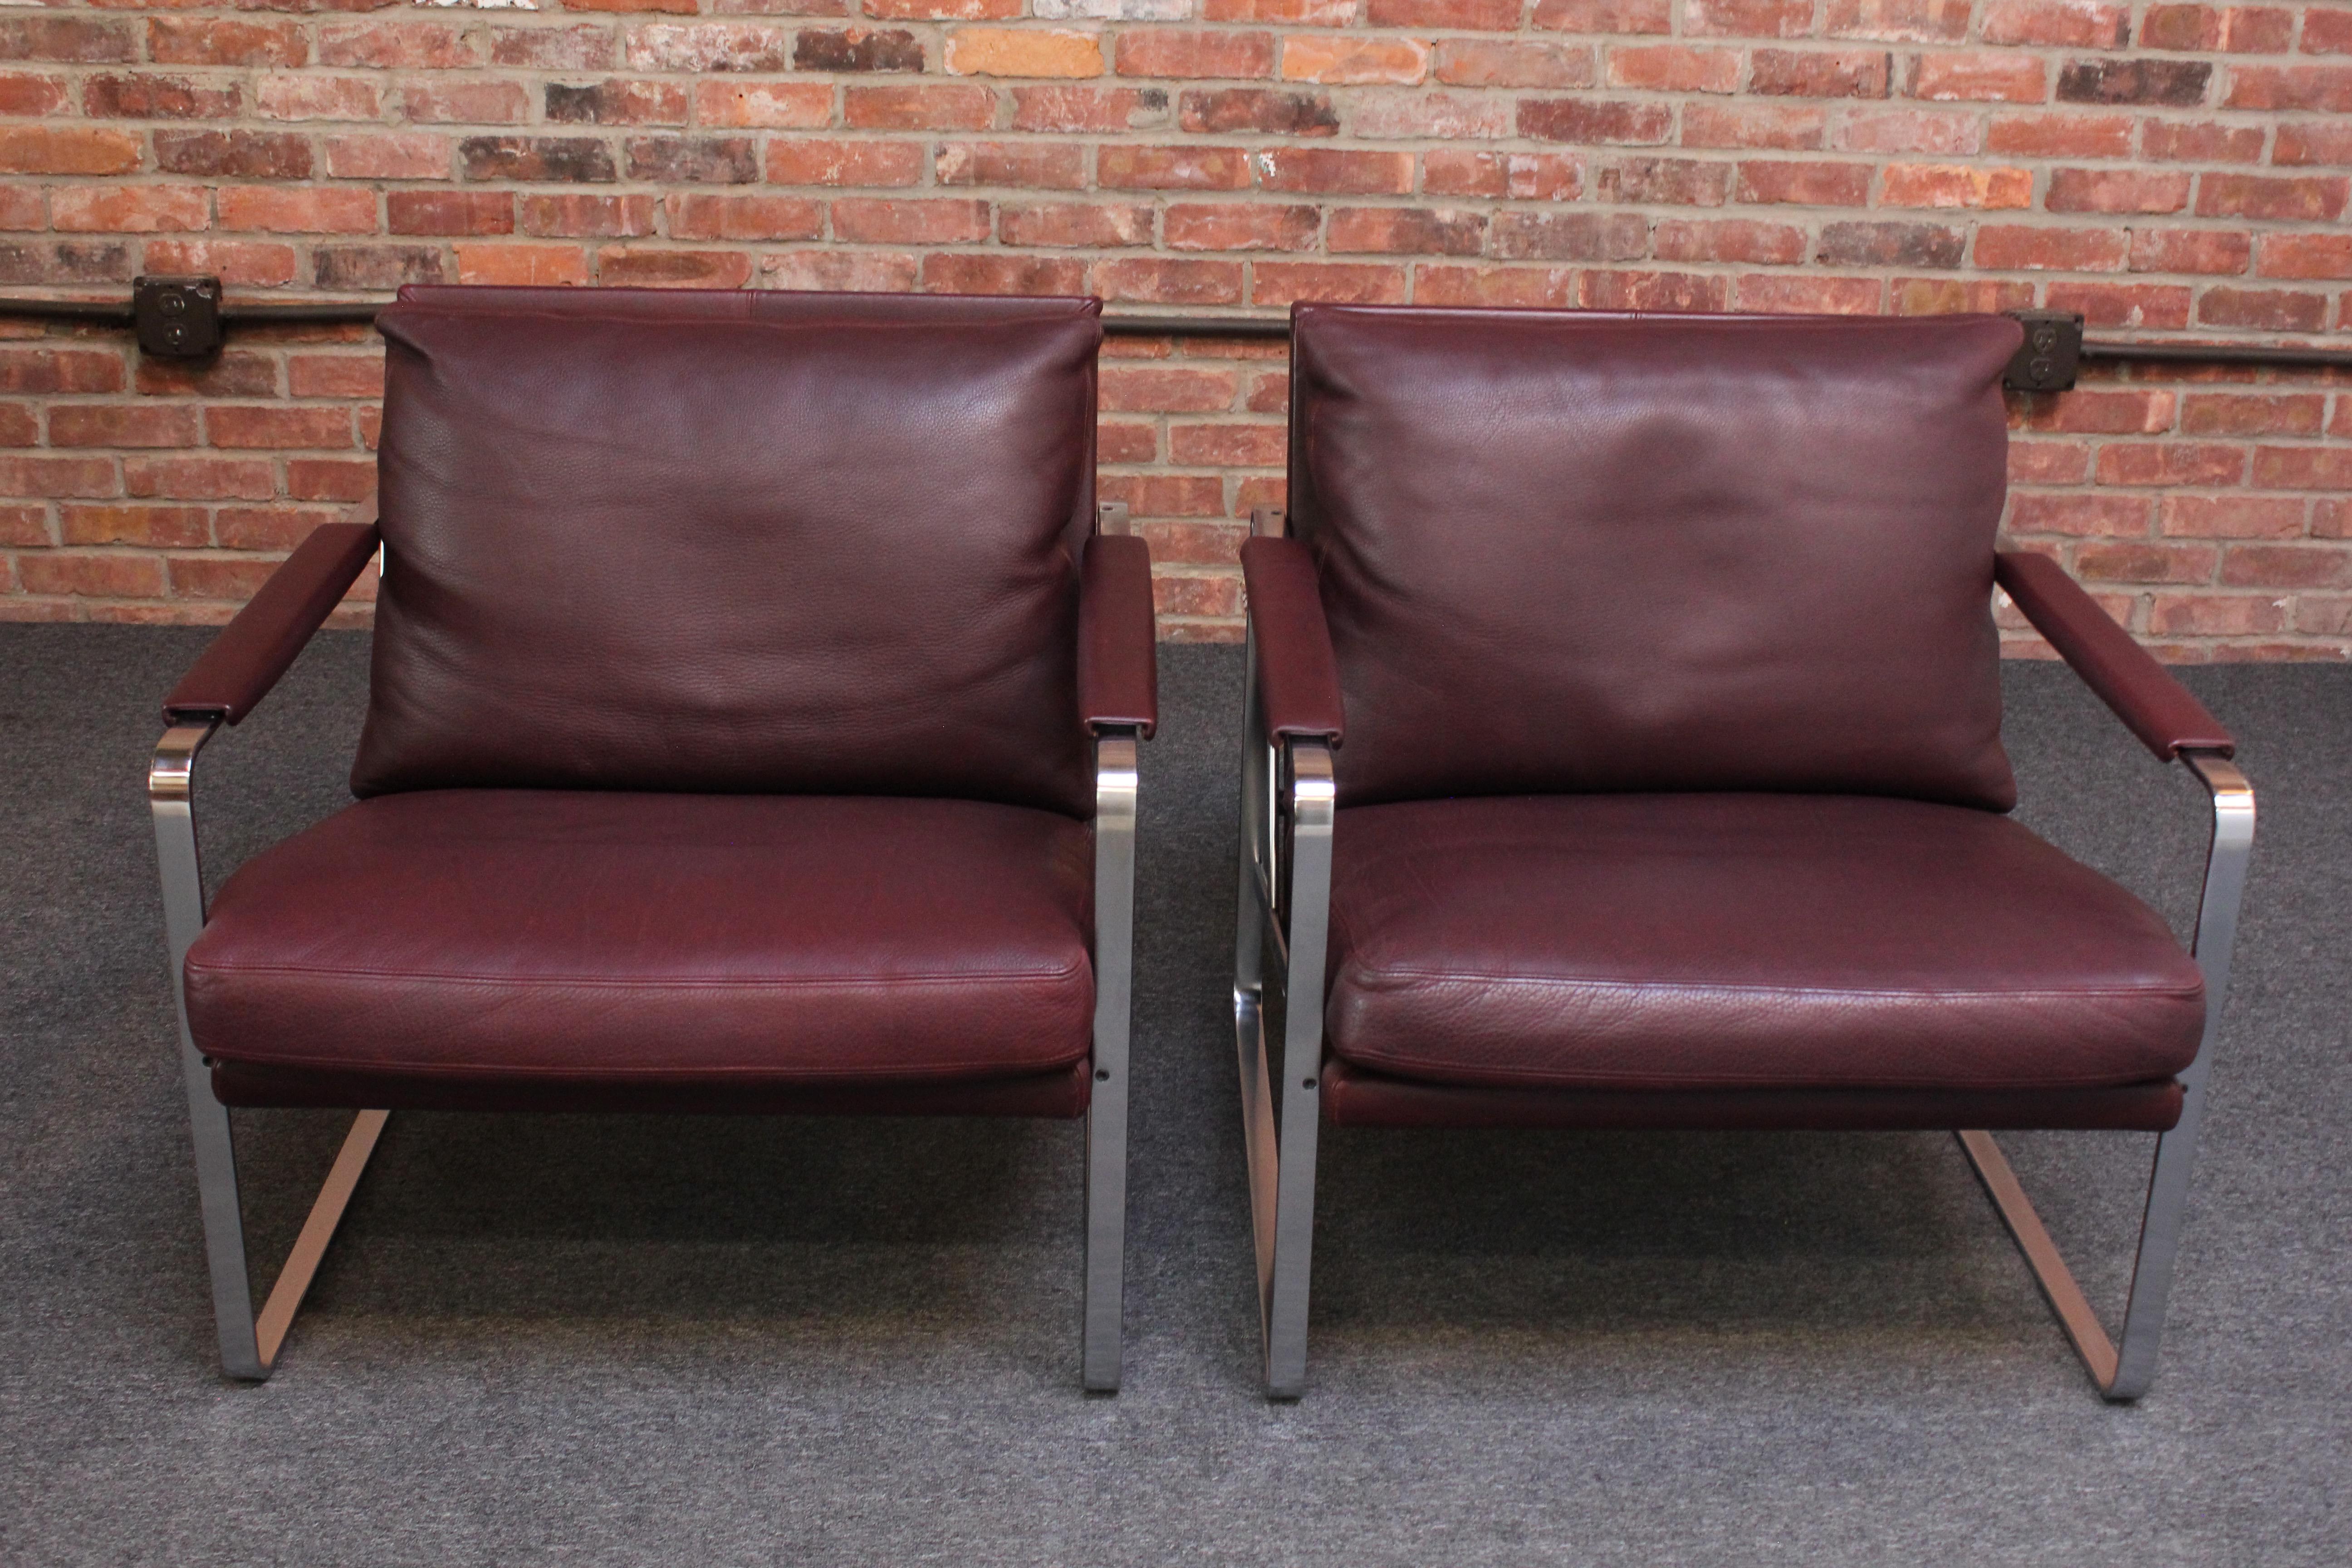 Pair of lounge chairs designed as part of the 